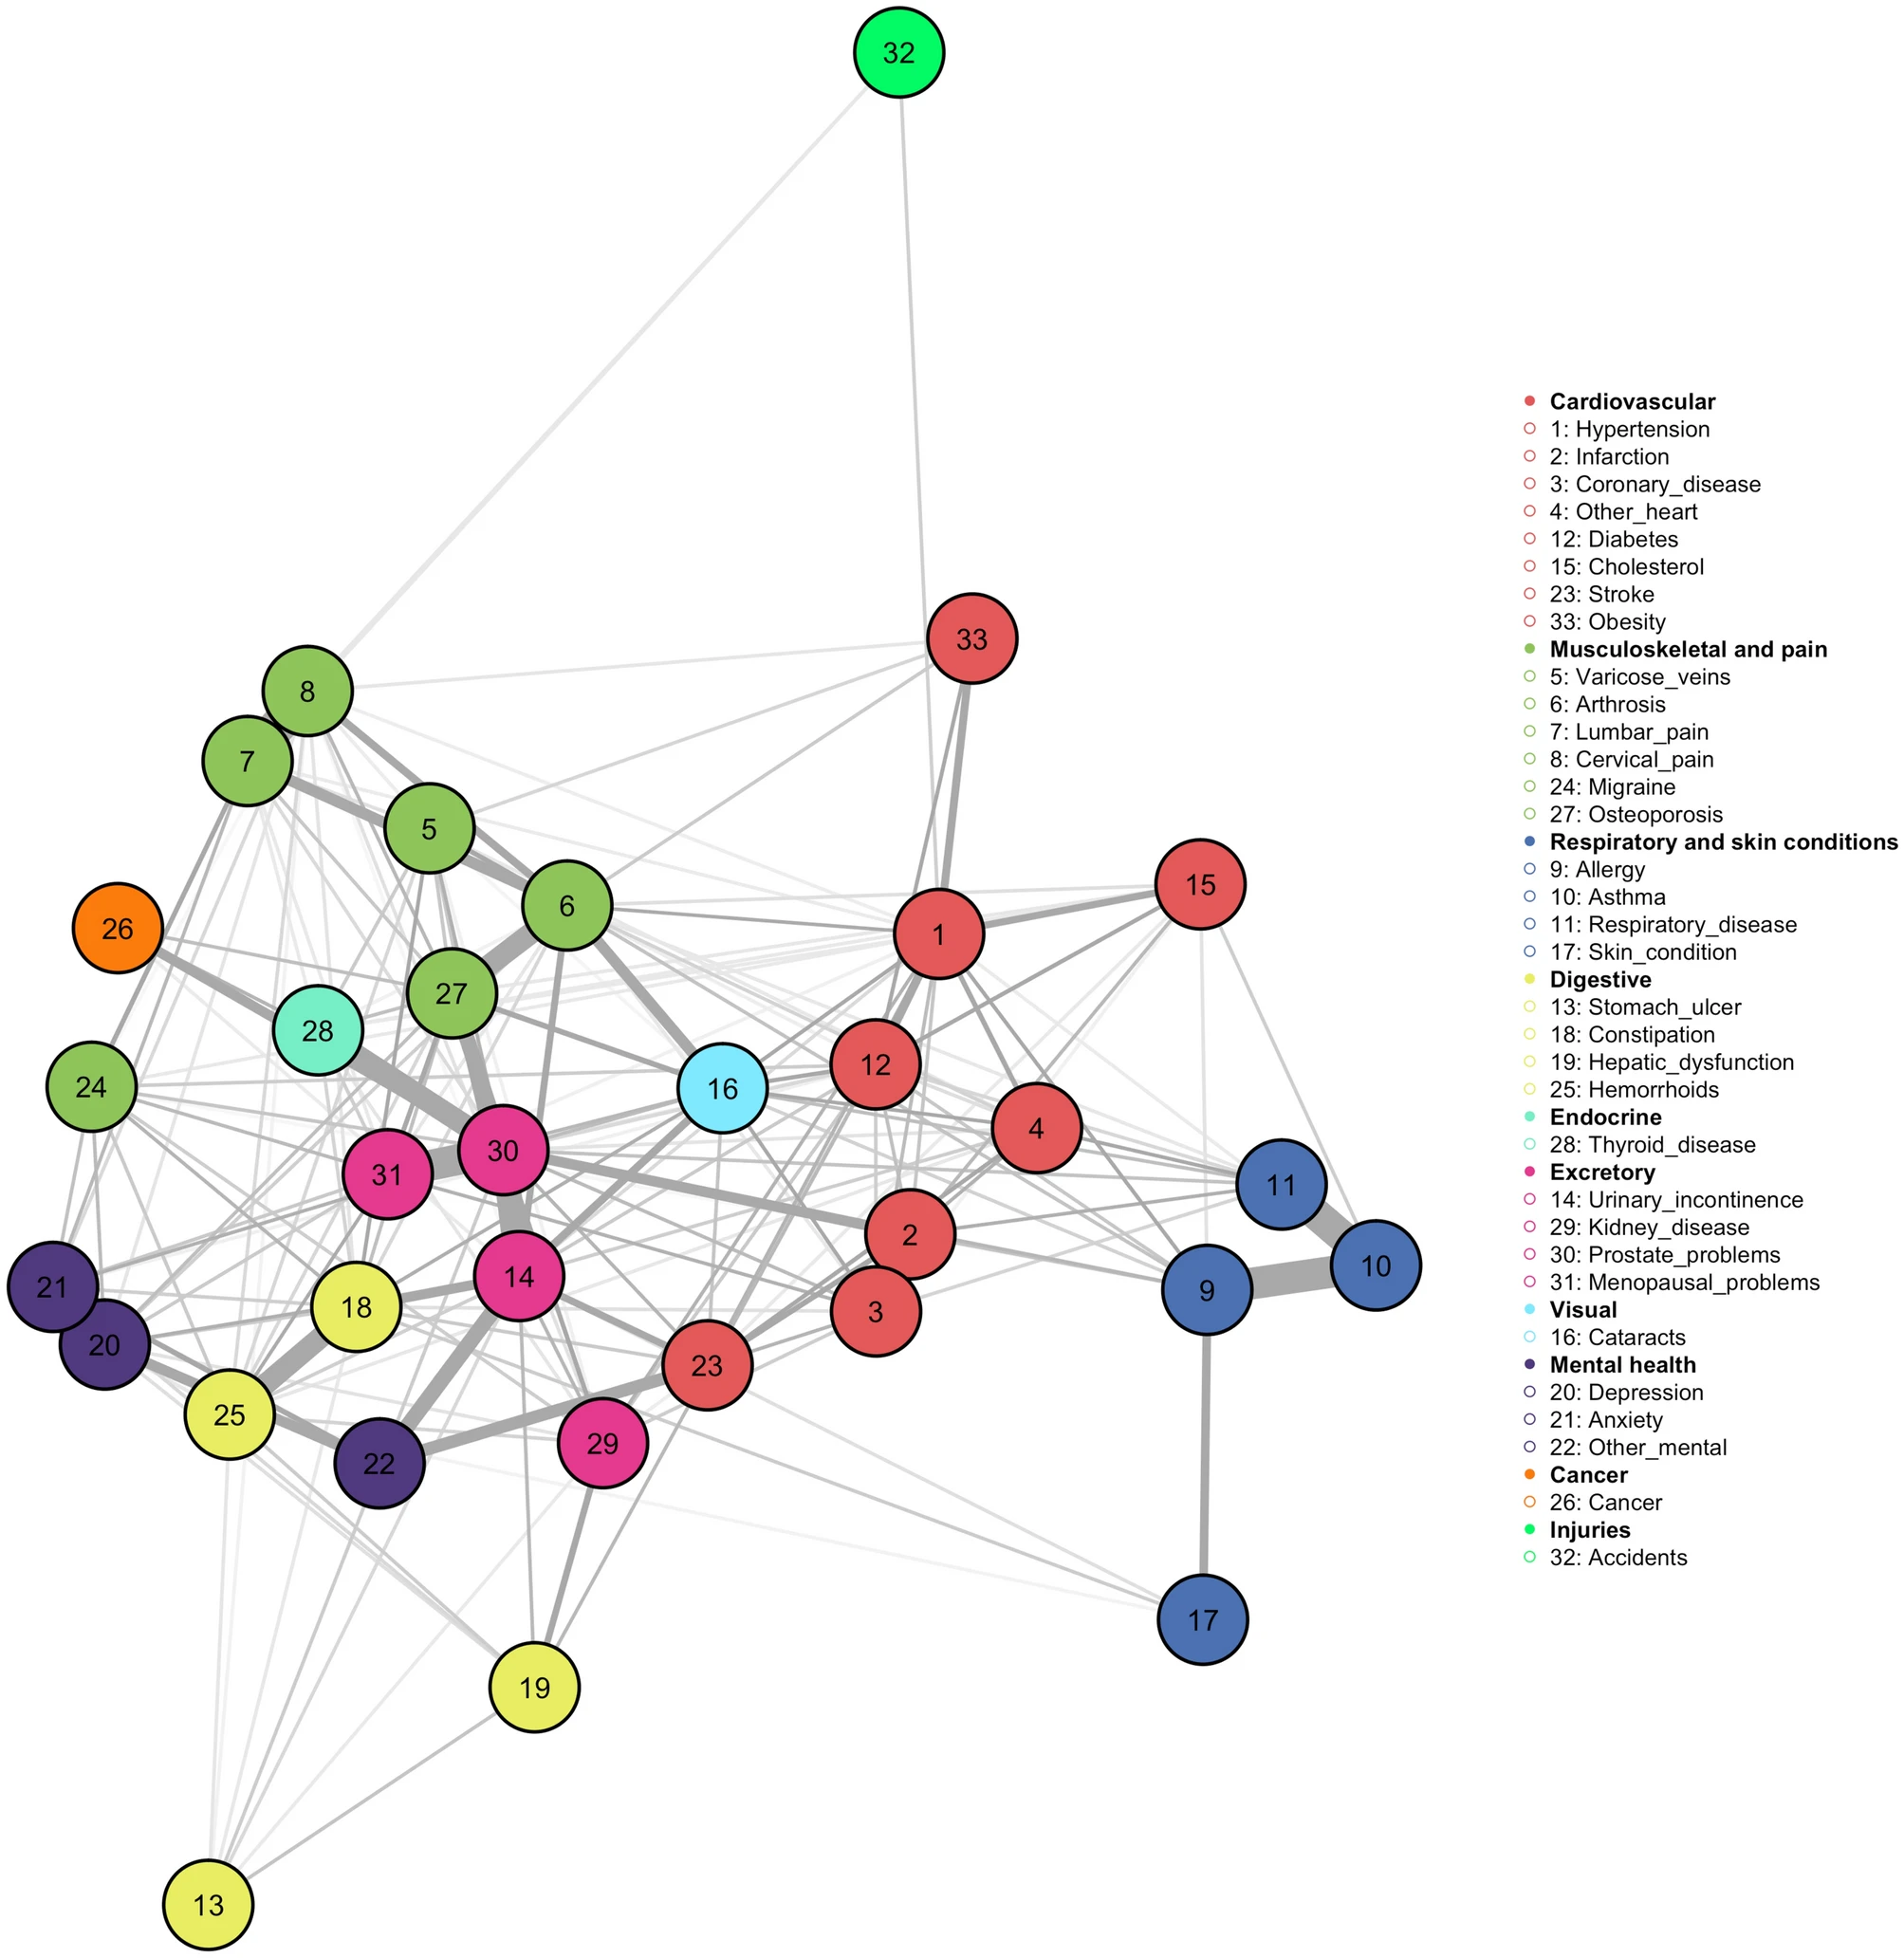 Publicación del artículo “Discovery and classification of complex multimorbidity patterns: unravelling chronicity networks and their social profiles”